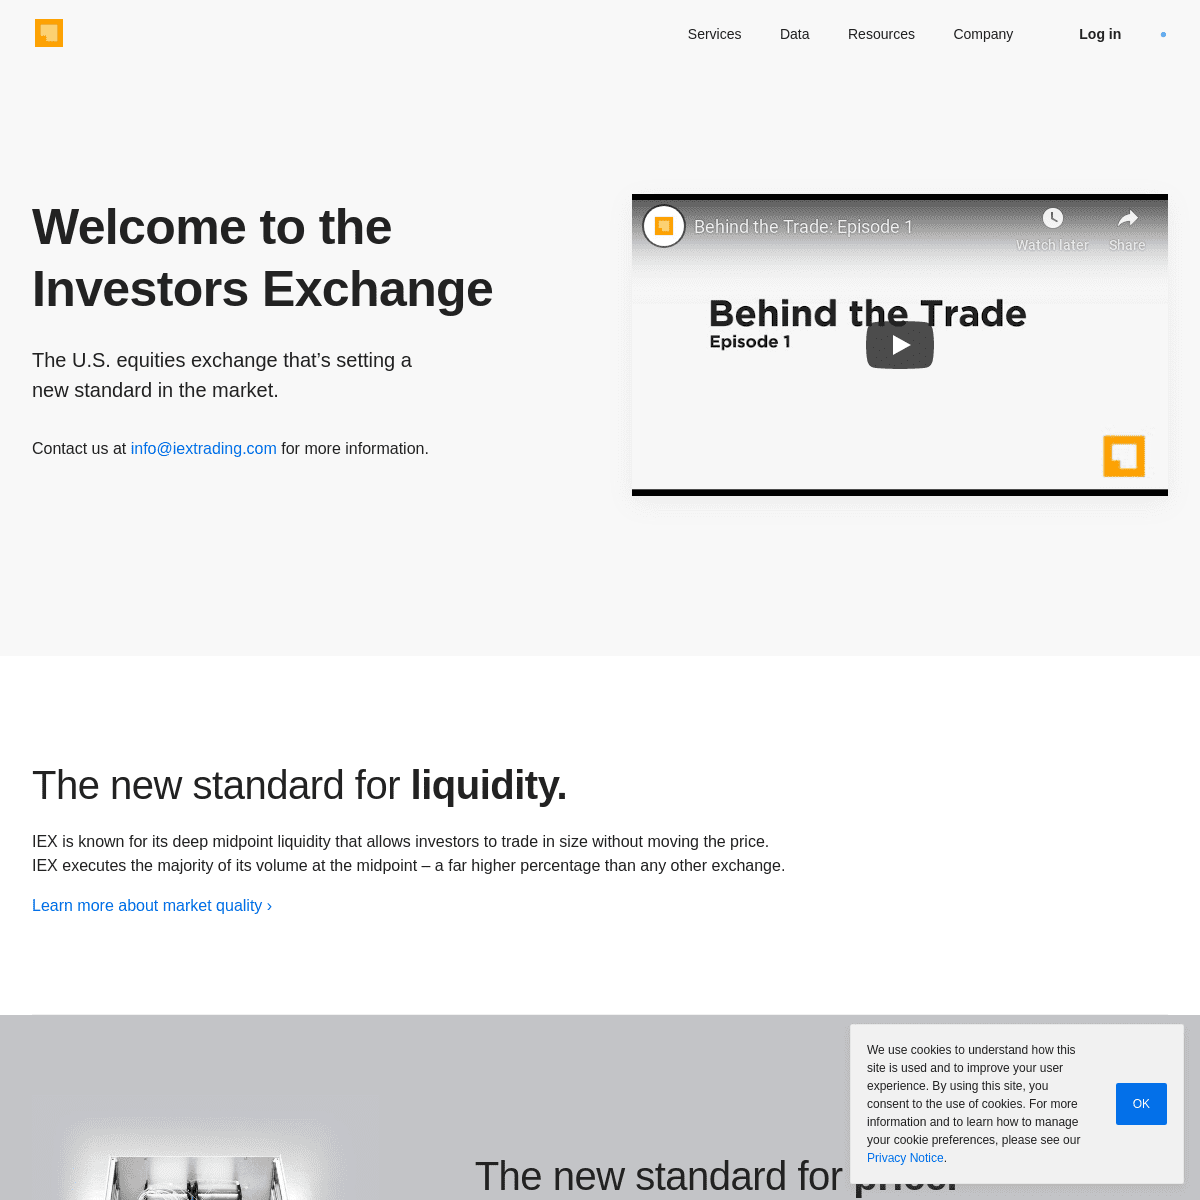 A complete backup of iextrading.com